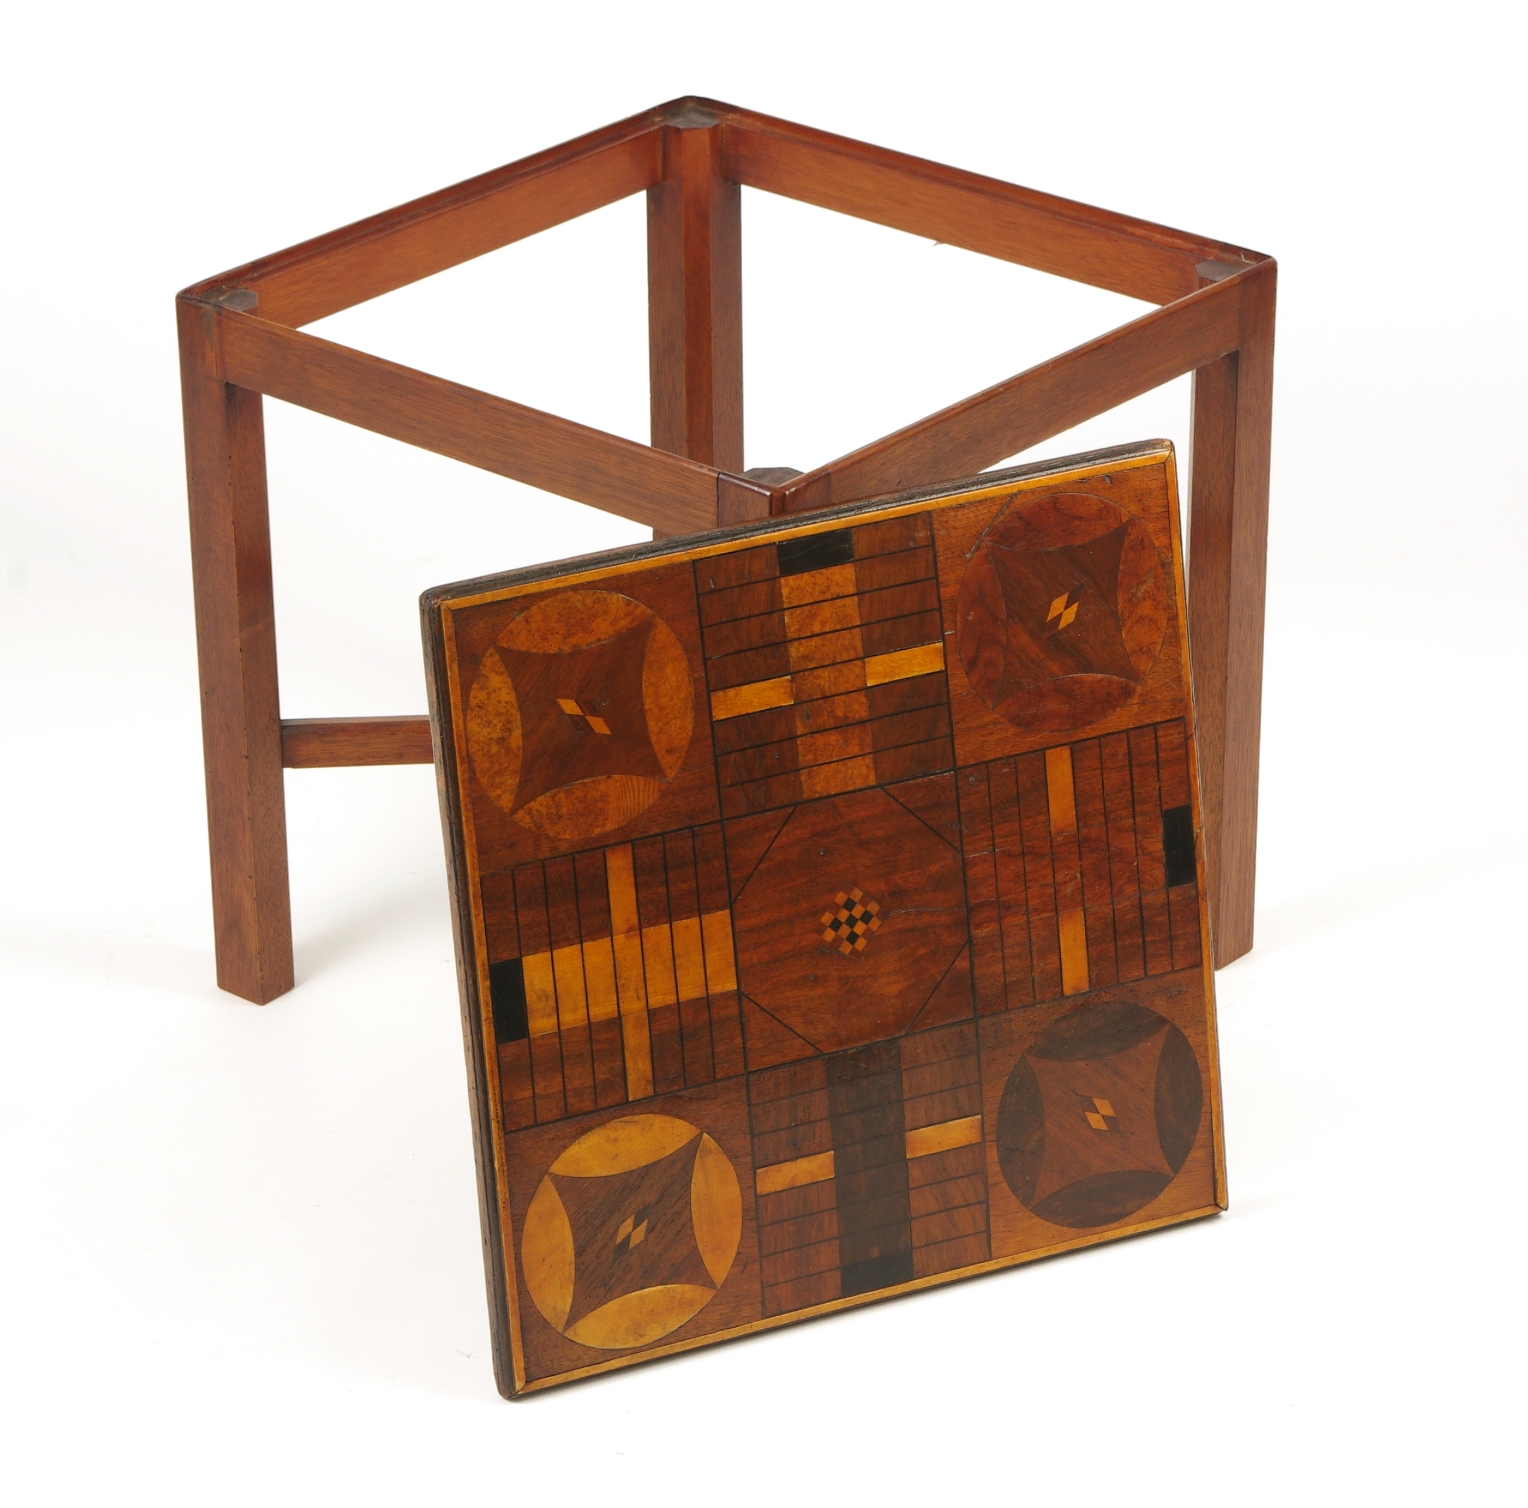 Inlaid Parcheesi Board Mounted as a Table, 19th c.